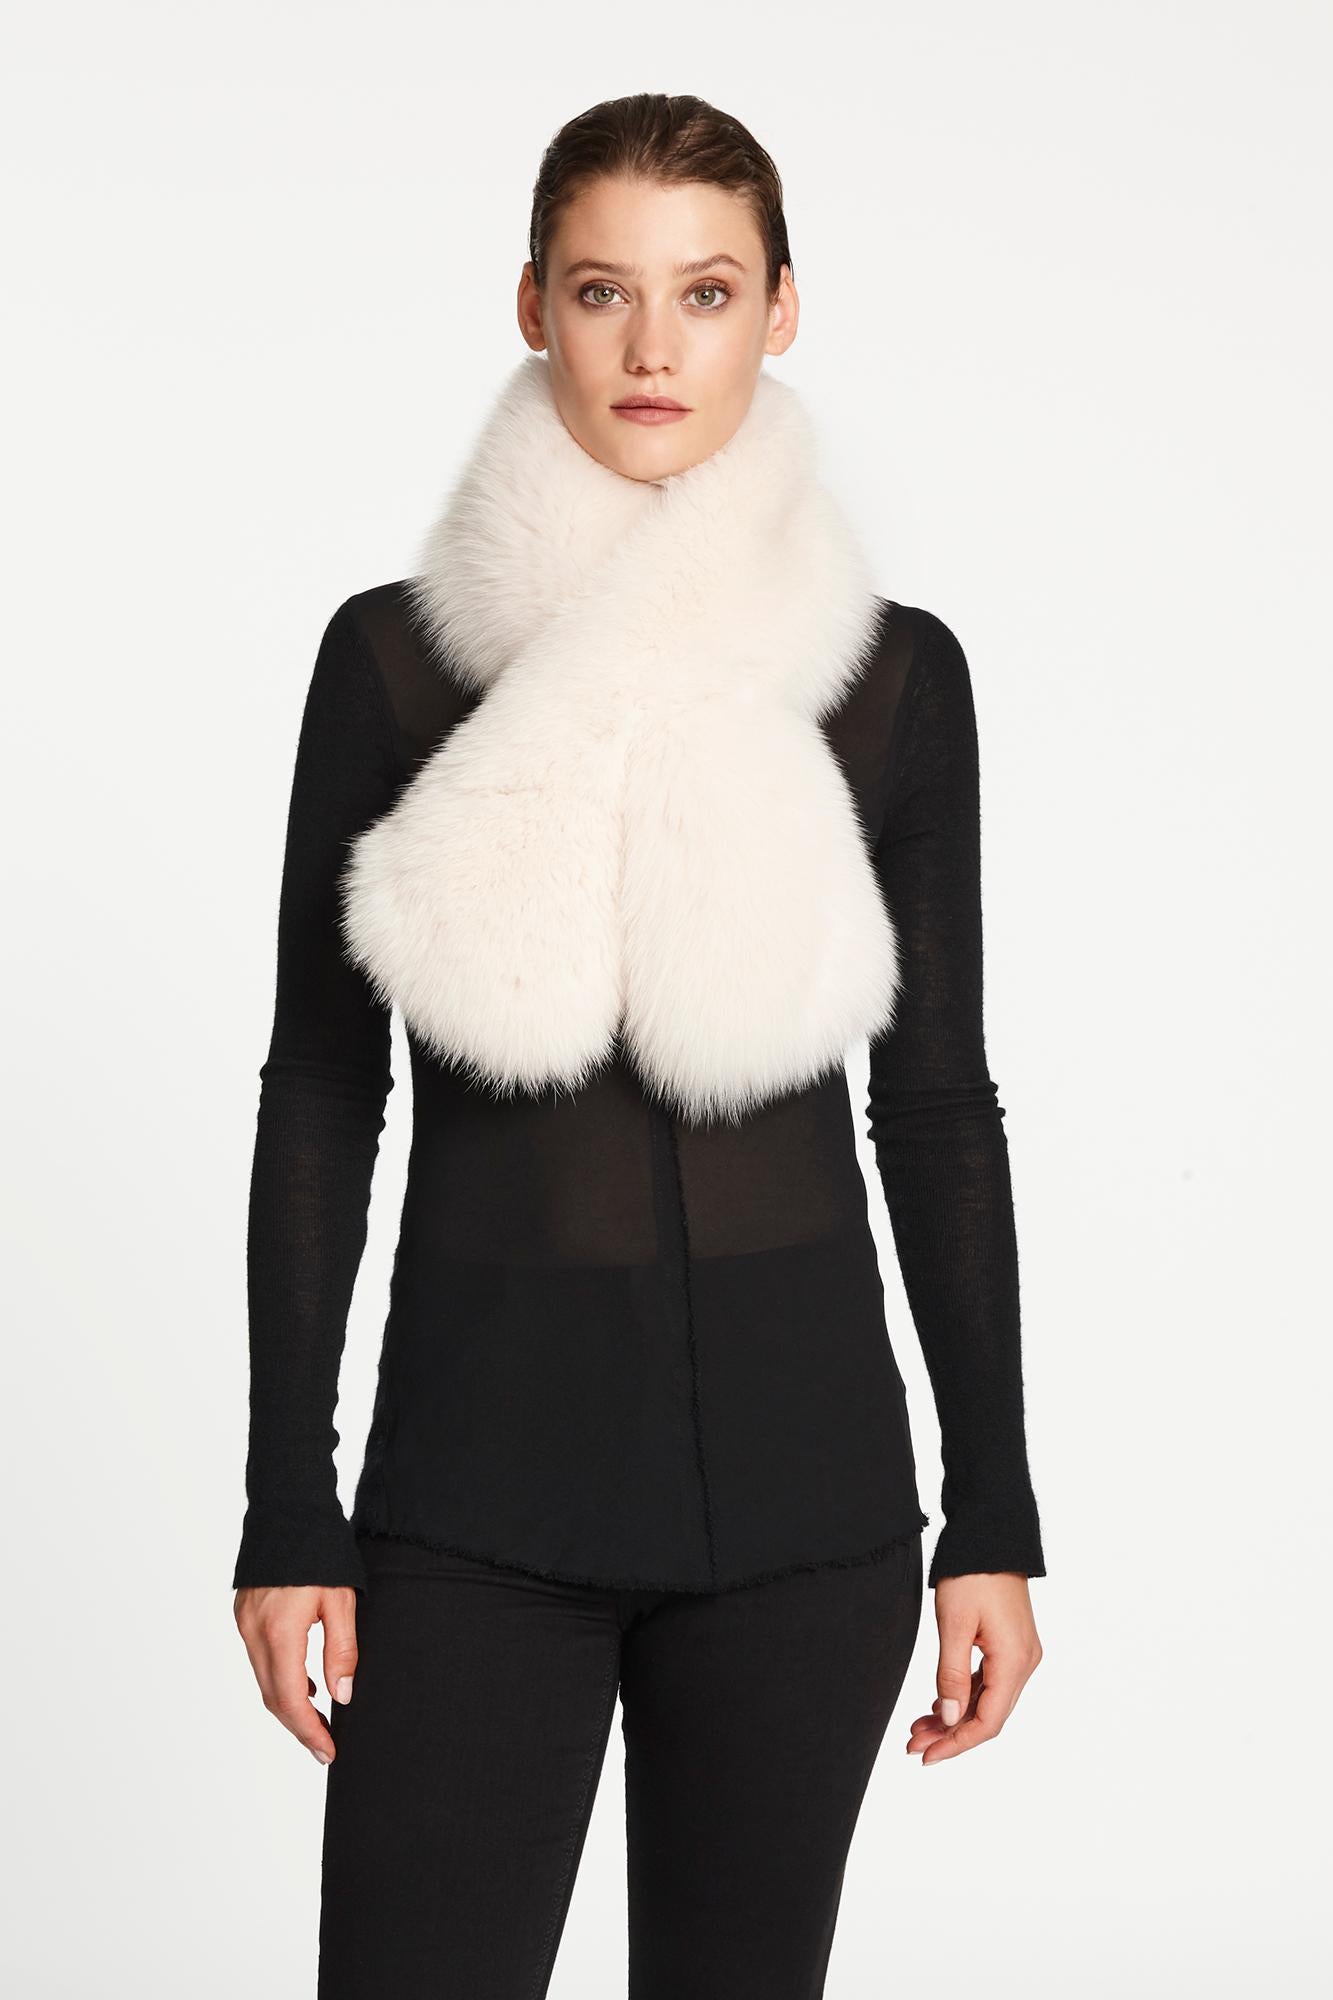 Verheyen London Lapel Cross-through Collar in Pearl White Fox Fur Brand New 

Brand new RRP Price 

The Lapel Cross-through Collar is Verheyen London’s casual everyday design, which is perfectly shaped to wear over any outfit.  Designed for